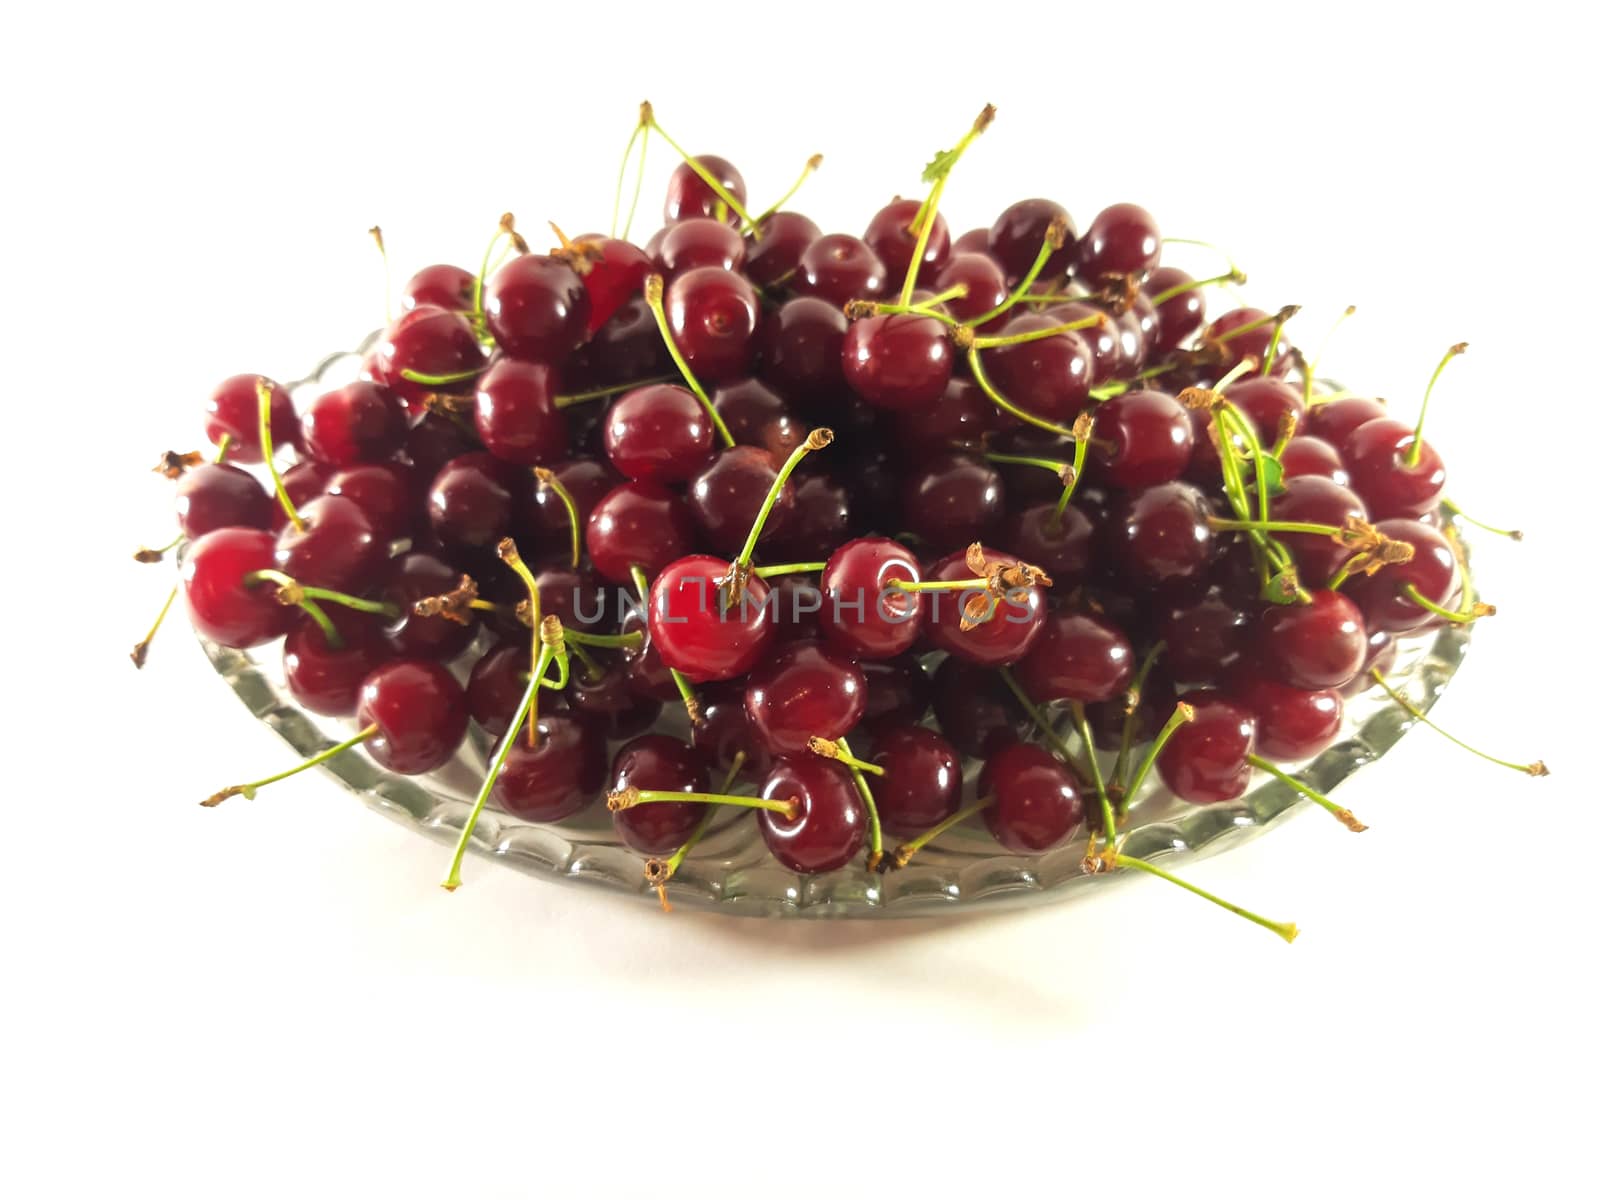 Photo cherry on a transparent plate. Healthy food. Vegetarian re by polyachenkovv@gmail.com